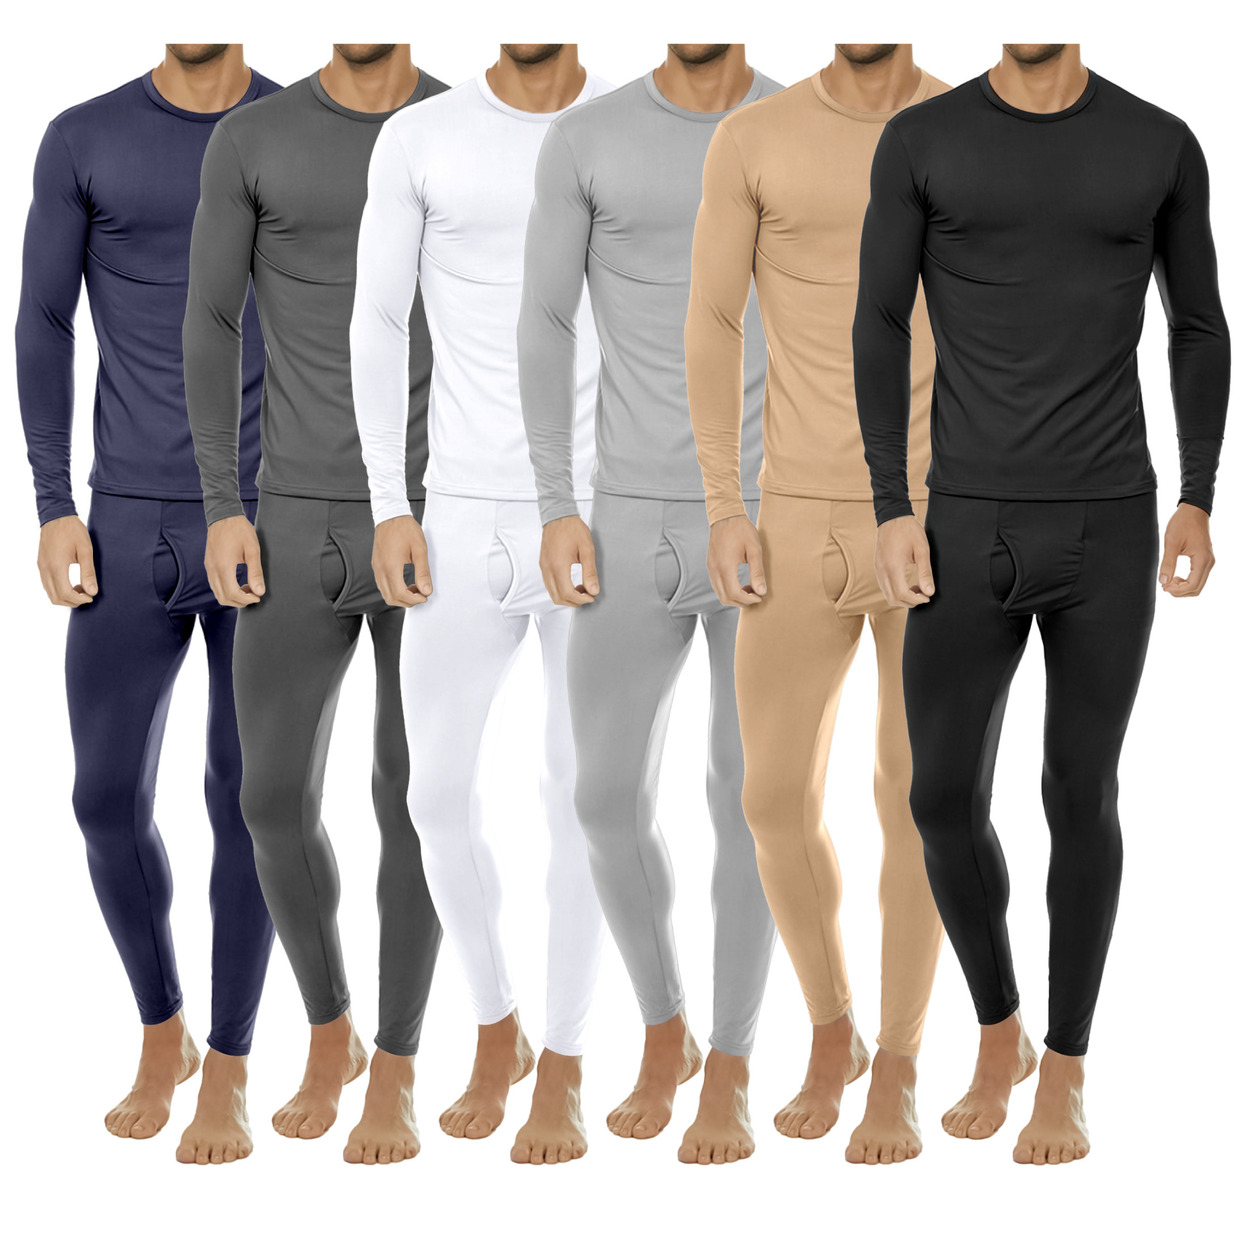 2-Pieces: Men's Winter Warm Fleece Lined Thermal Underwear Set For Cold Weather - Black, Xx-large